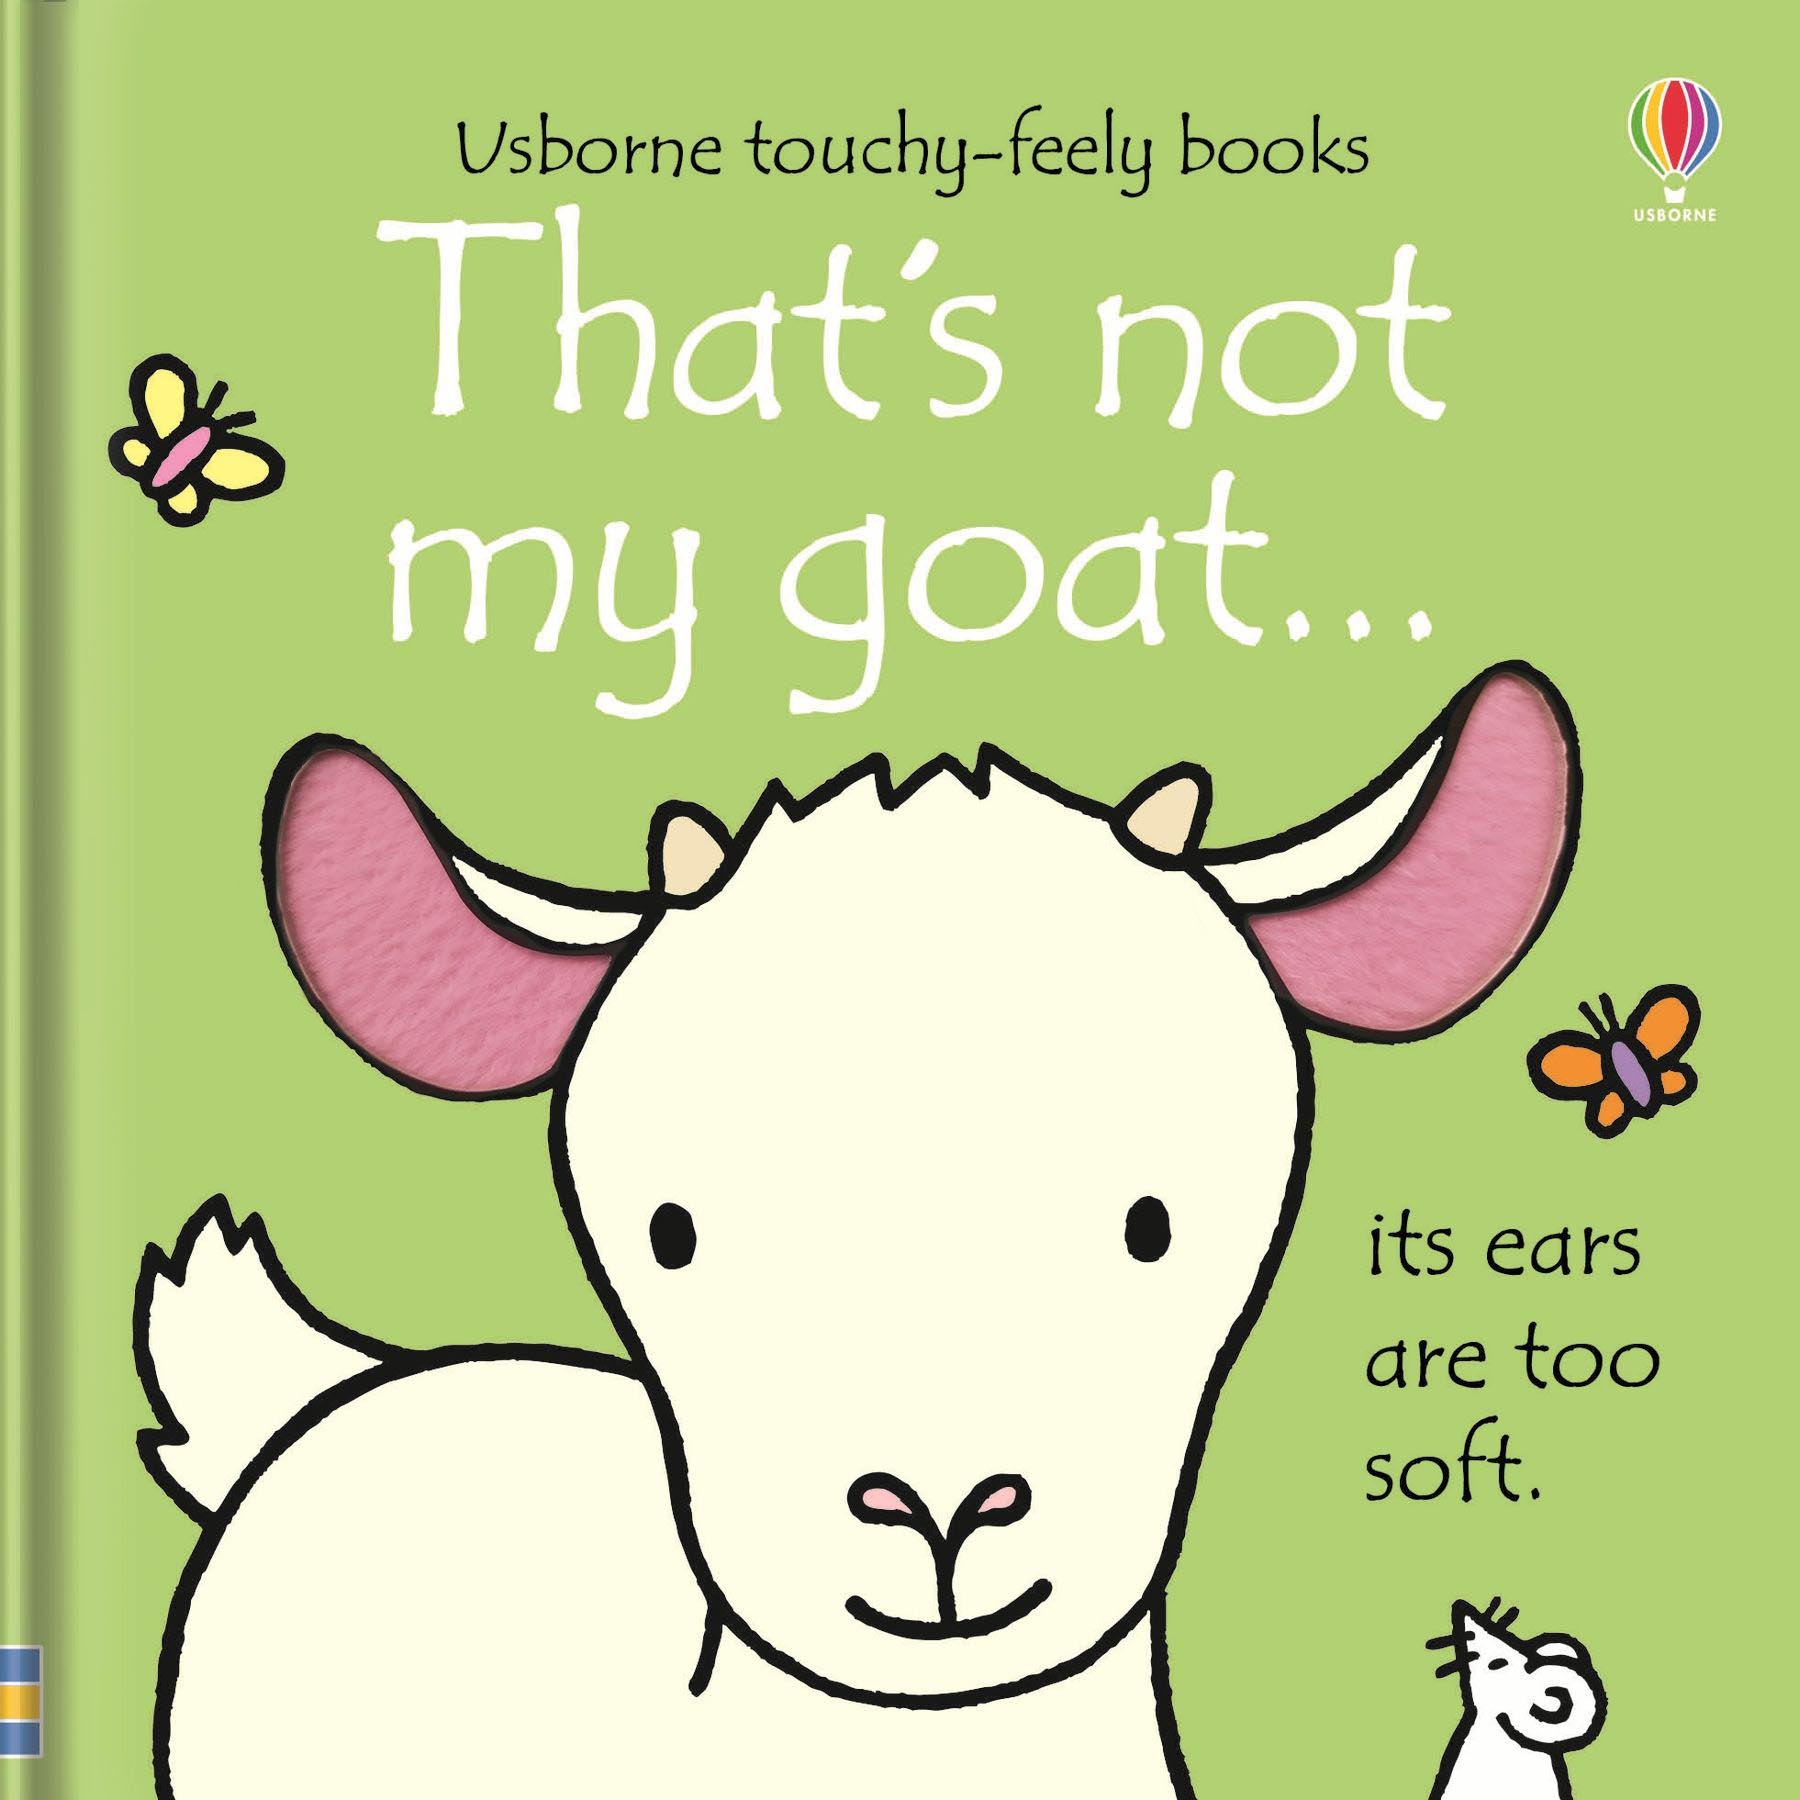 Usborne Touchy Feely Books Thats not my Goat